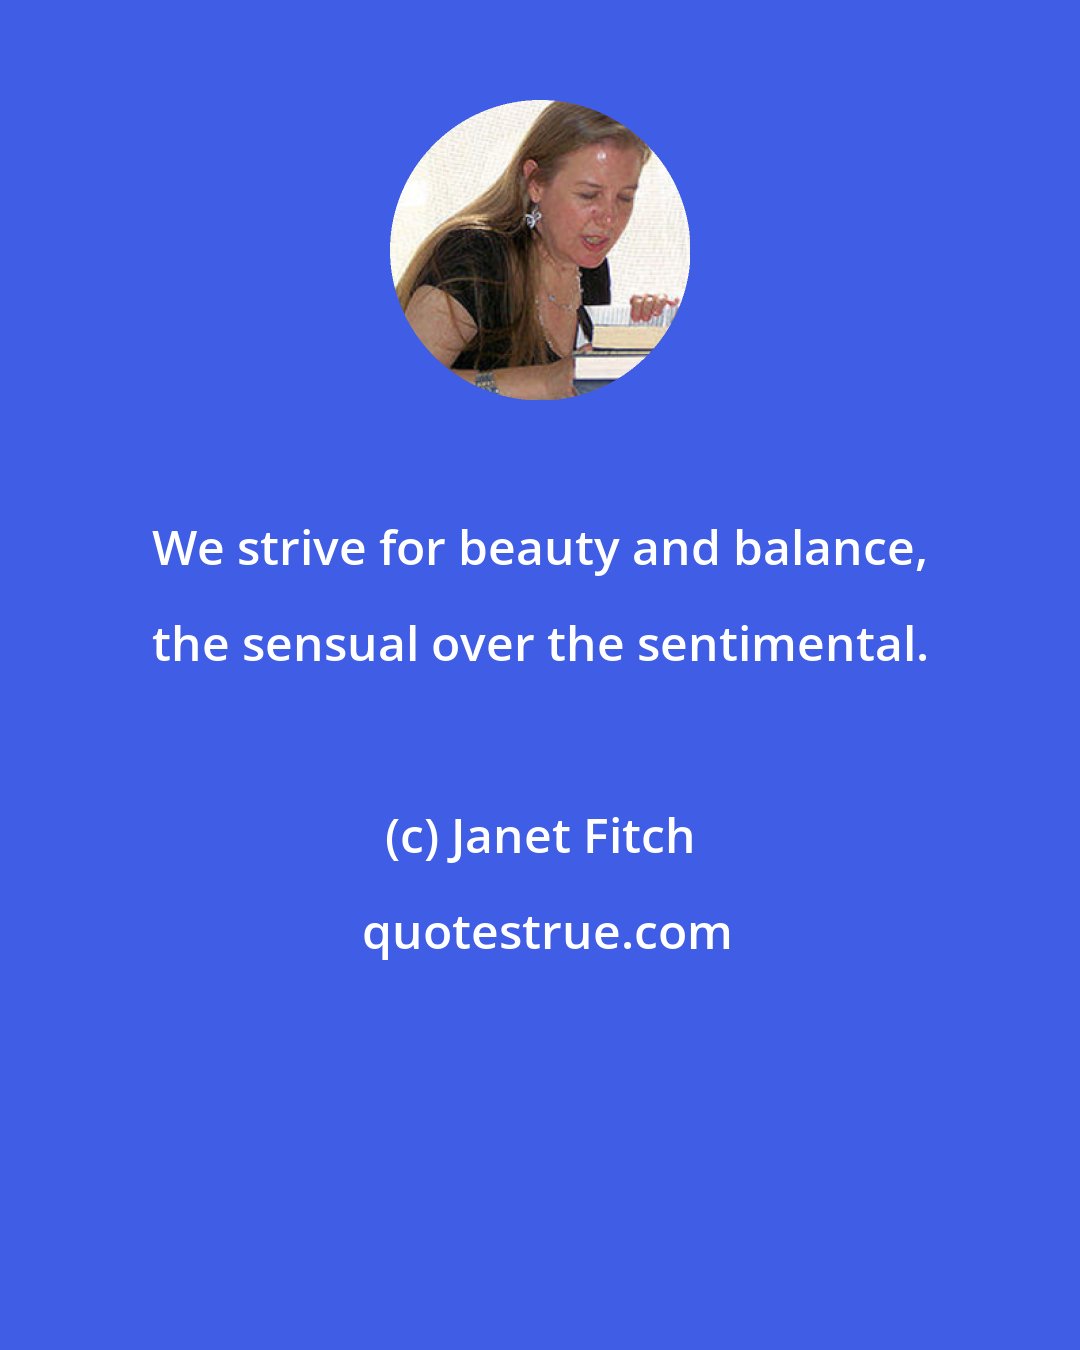 Janet Fitch: We strive for beauty and balance, the sensual over the sentimental.